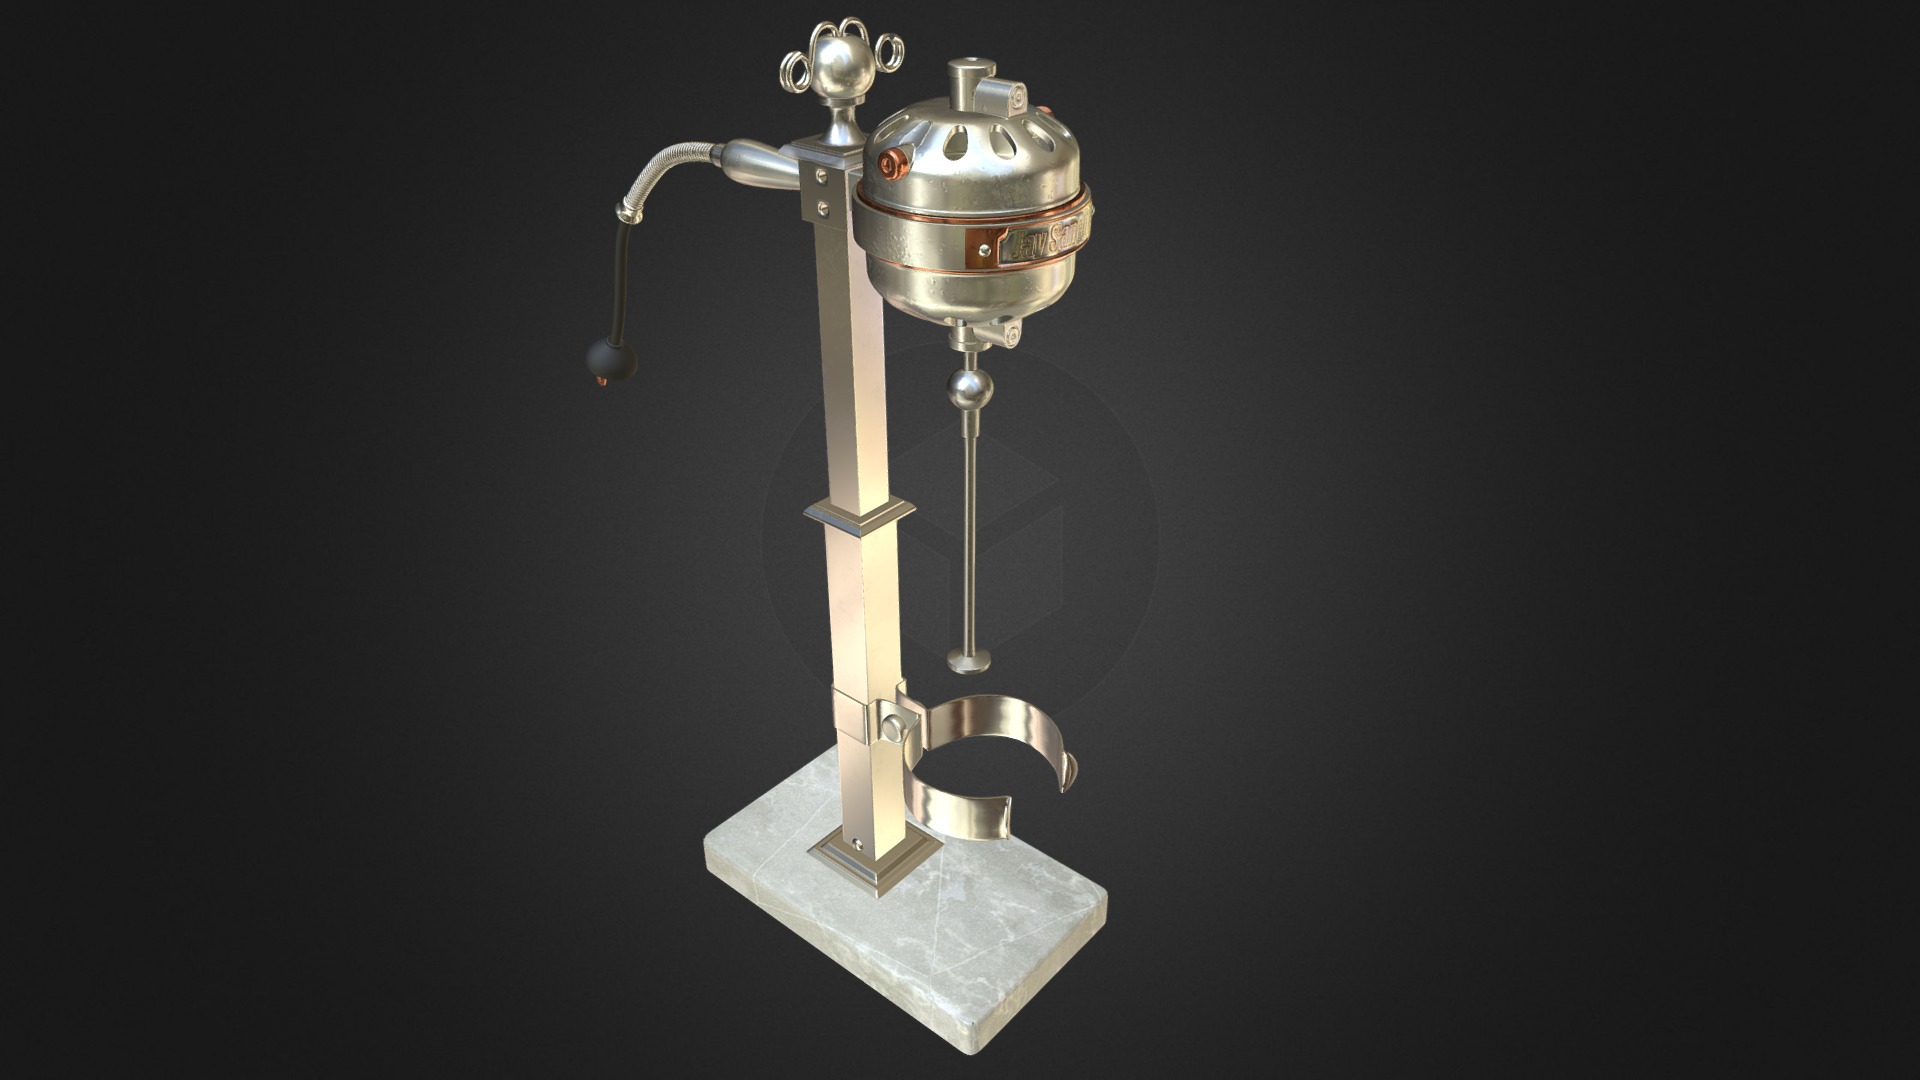 3D model 1915 Hamilton Beach malt mixer - This is a 3D model of the 1915 Hamilton Beach malt mixer. The 3D model is about a silver and gold robot.